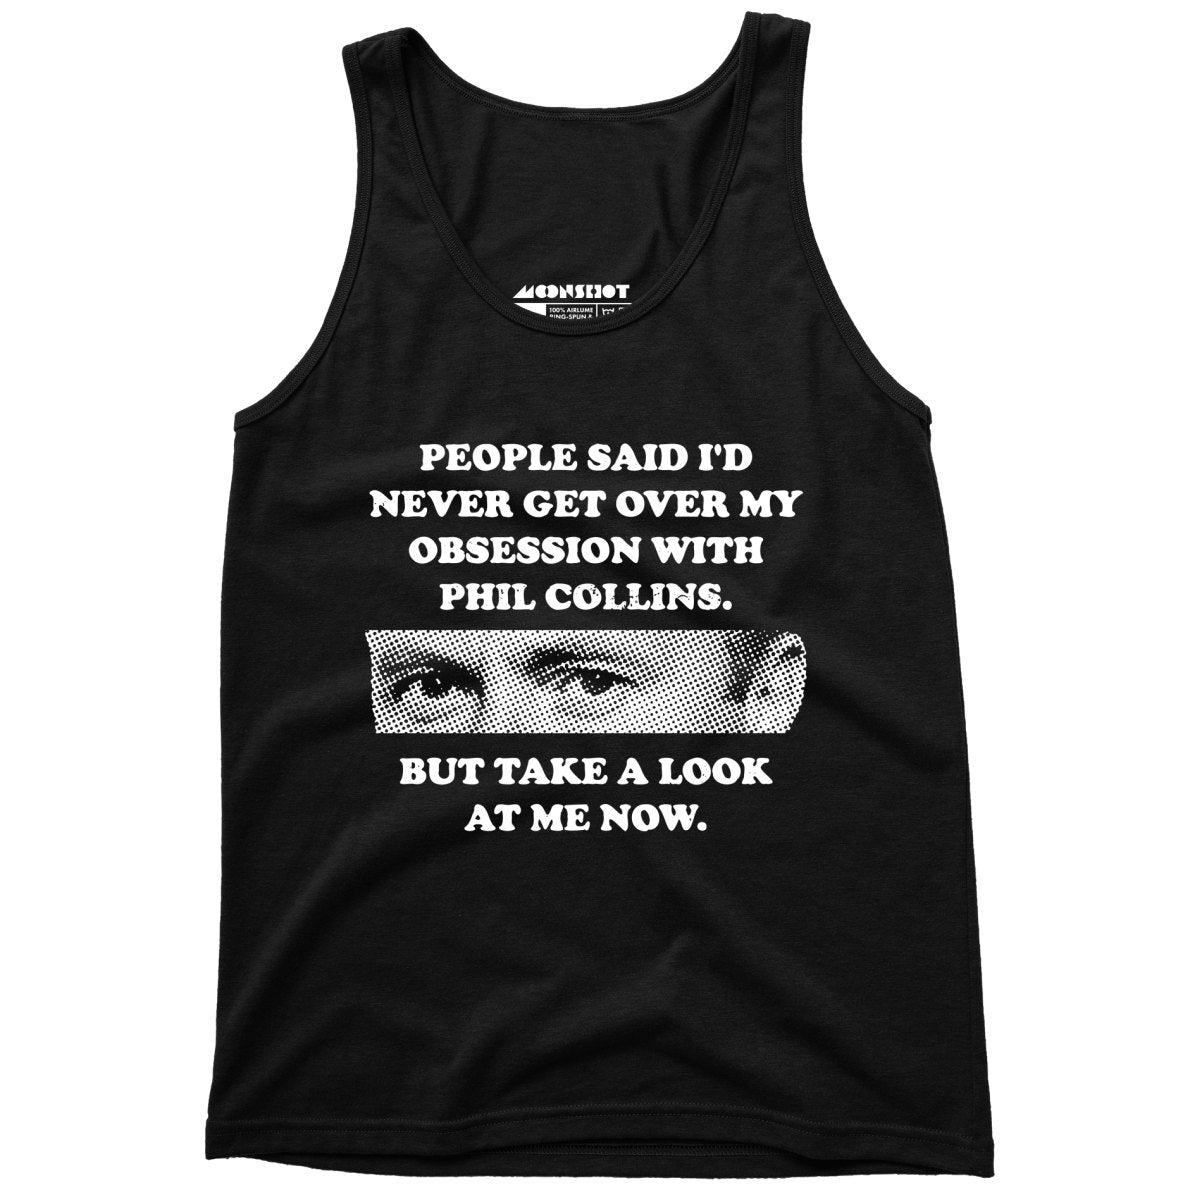 But Take a Look at Me Now - Unisex Tank Top